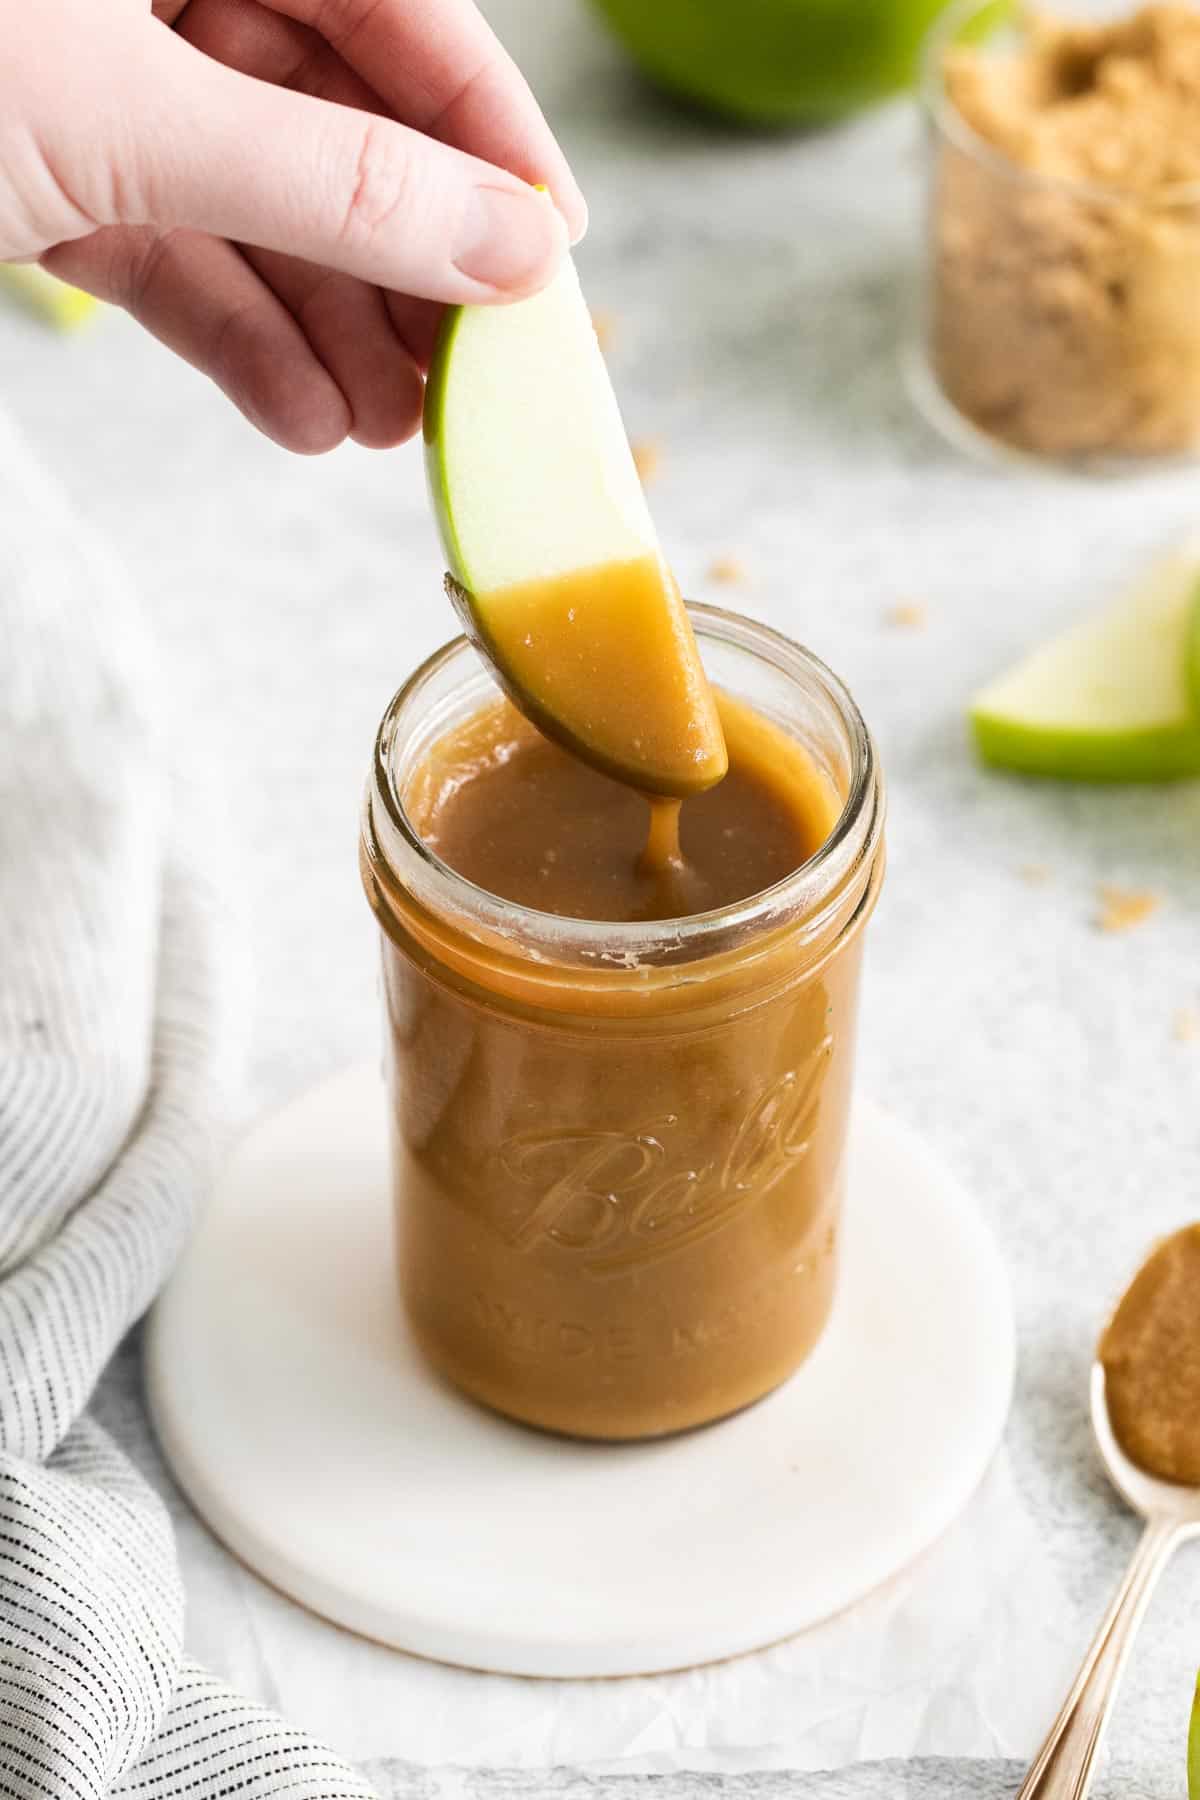 Dairy-free caramel in a jar with a spoon in it